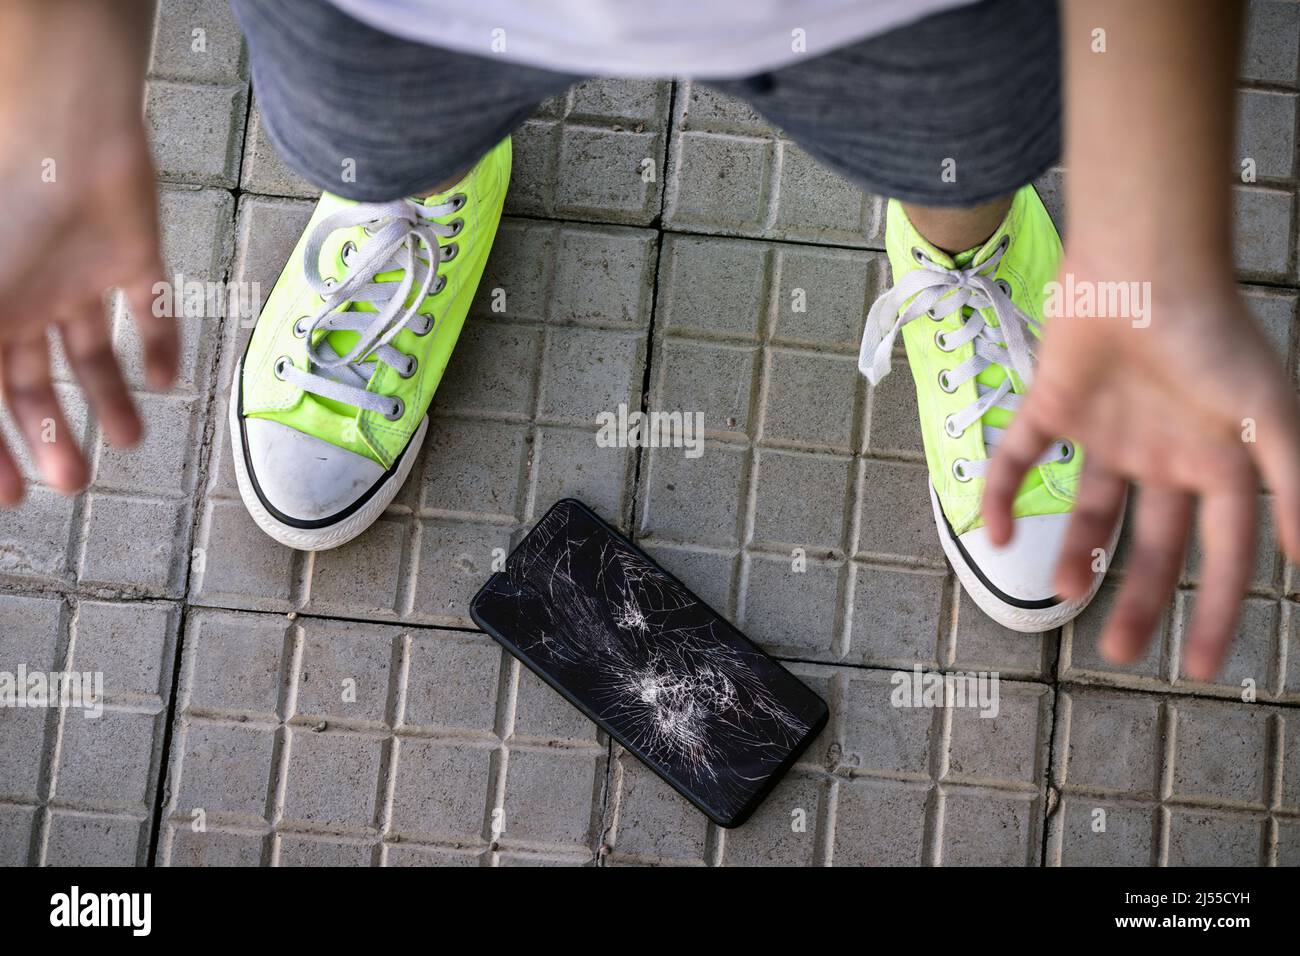 young child breaking cell phone, device dropped on the floor and screen shattered, no concert, careless child, cracked smartphone protective film Stock Photo